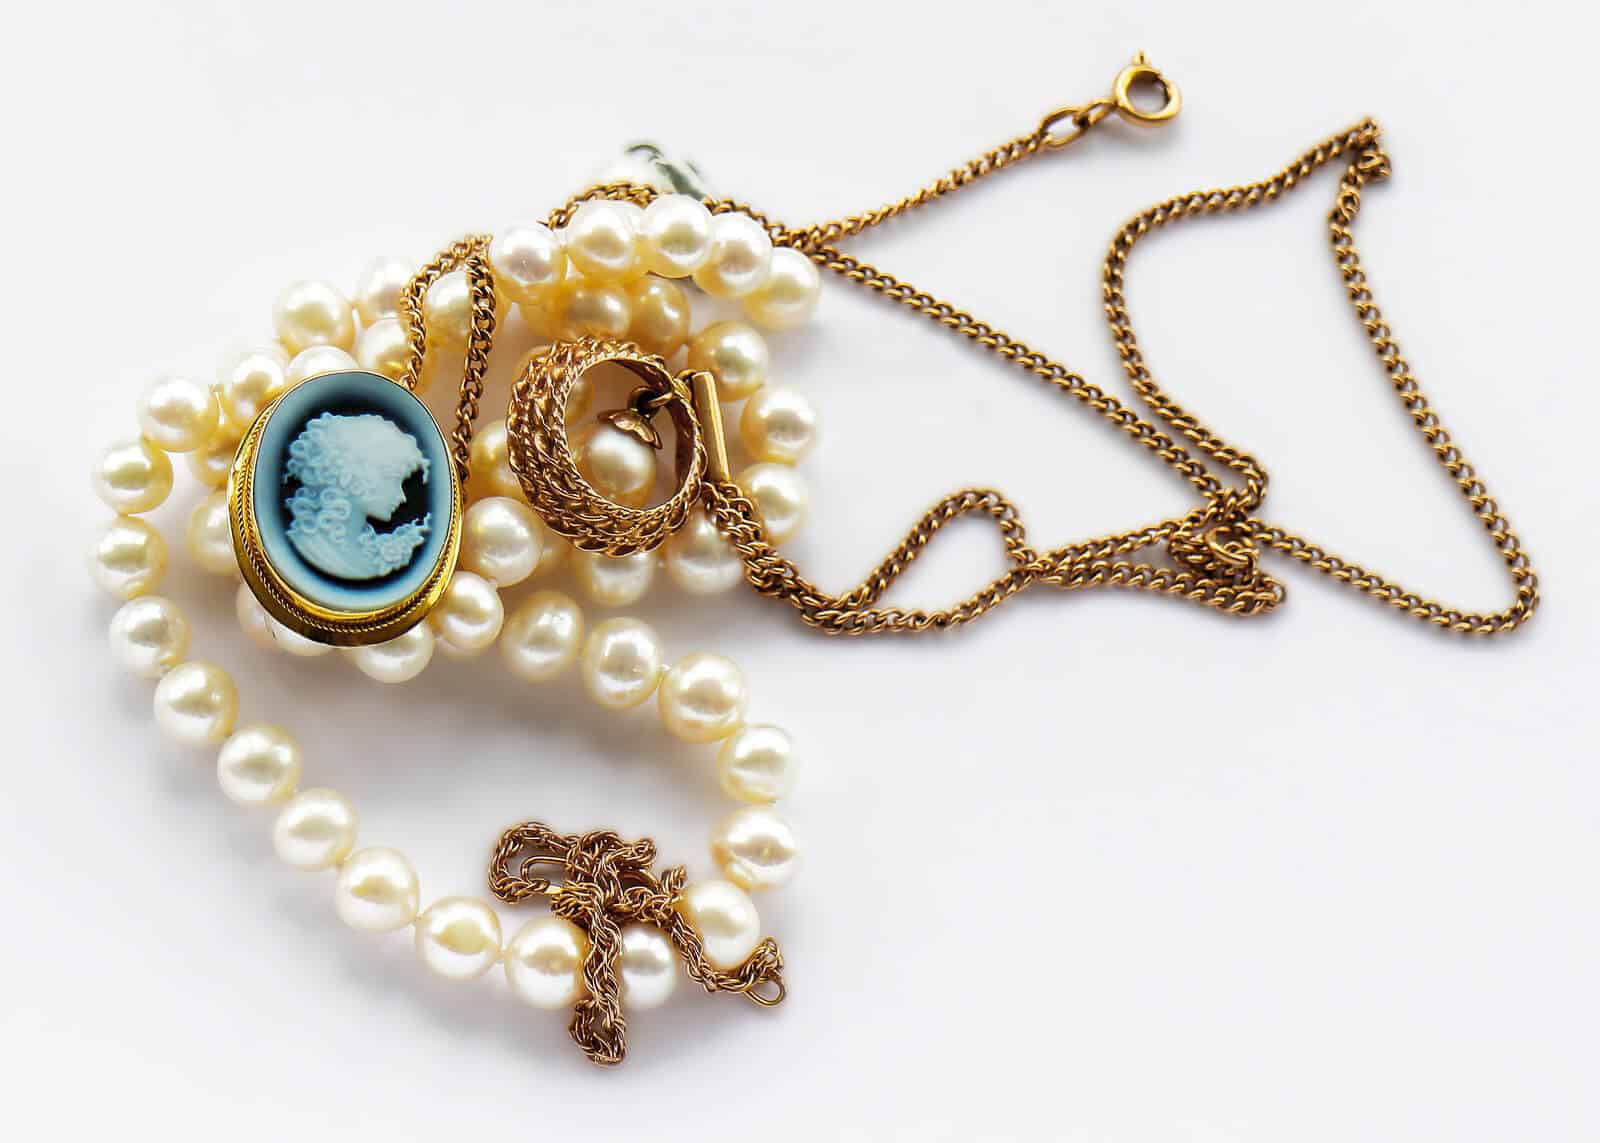 Cameo Jewelry Is Back – Here’s What You Need to Know